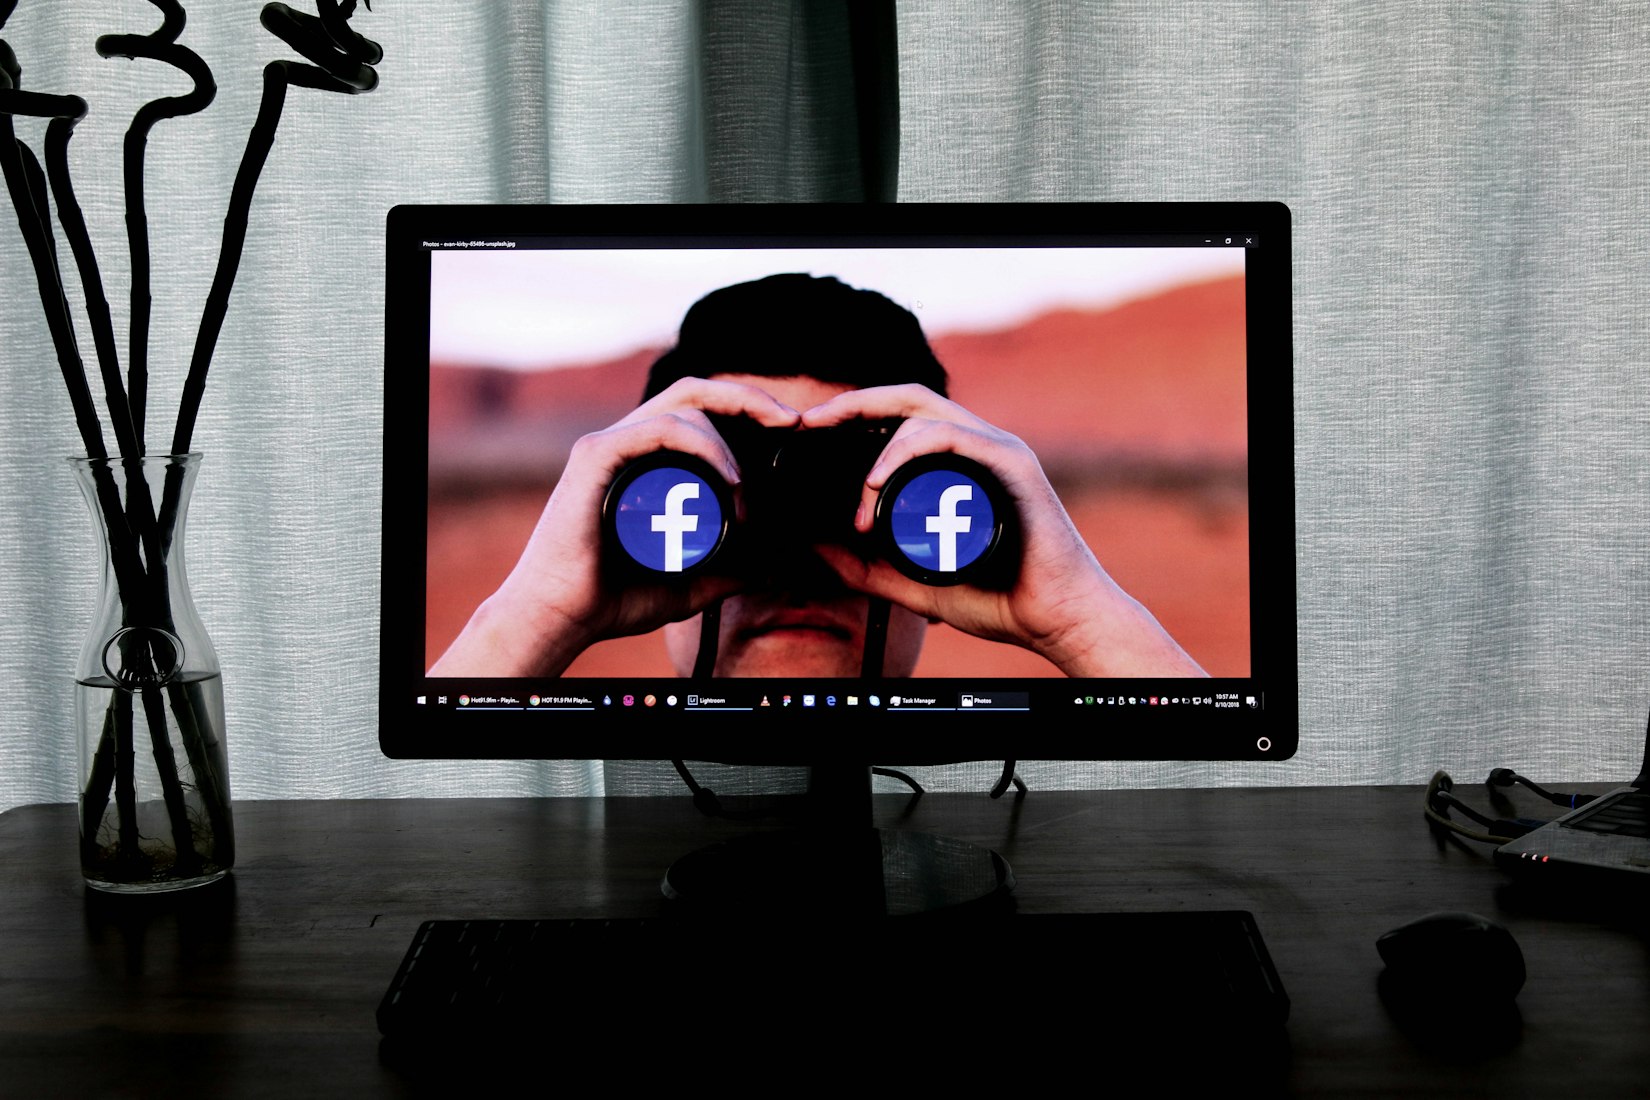 Google and Facebook spying